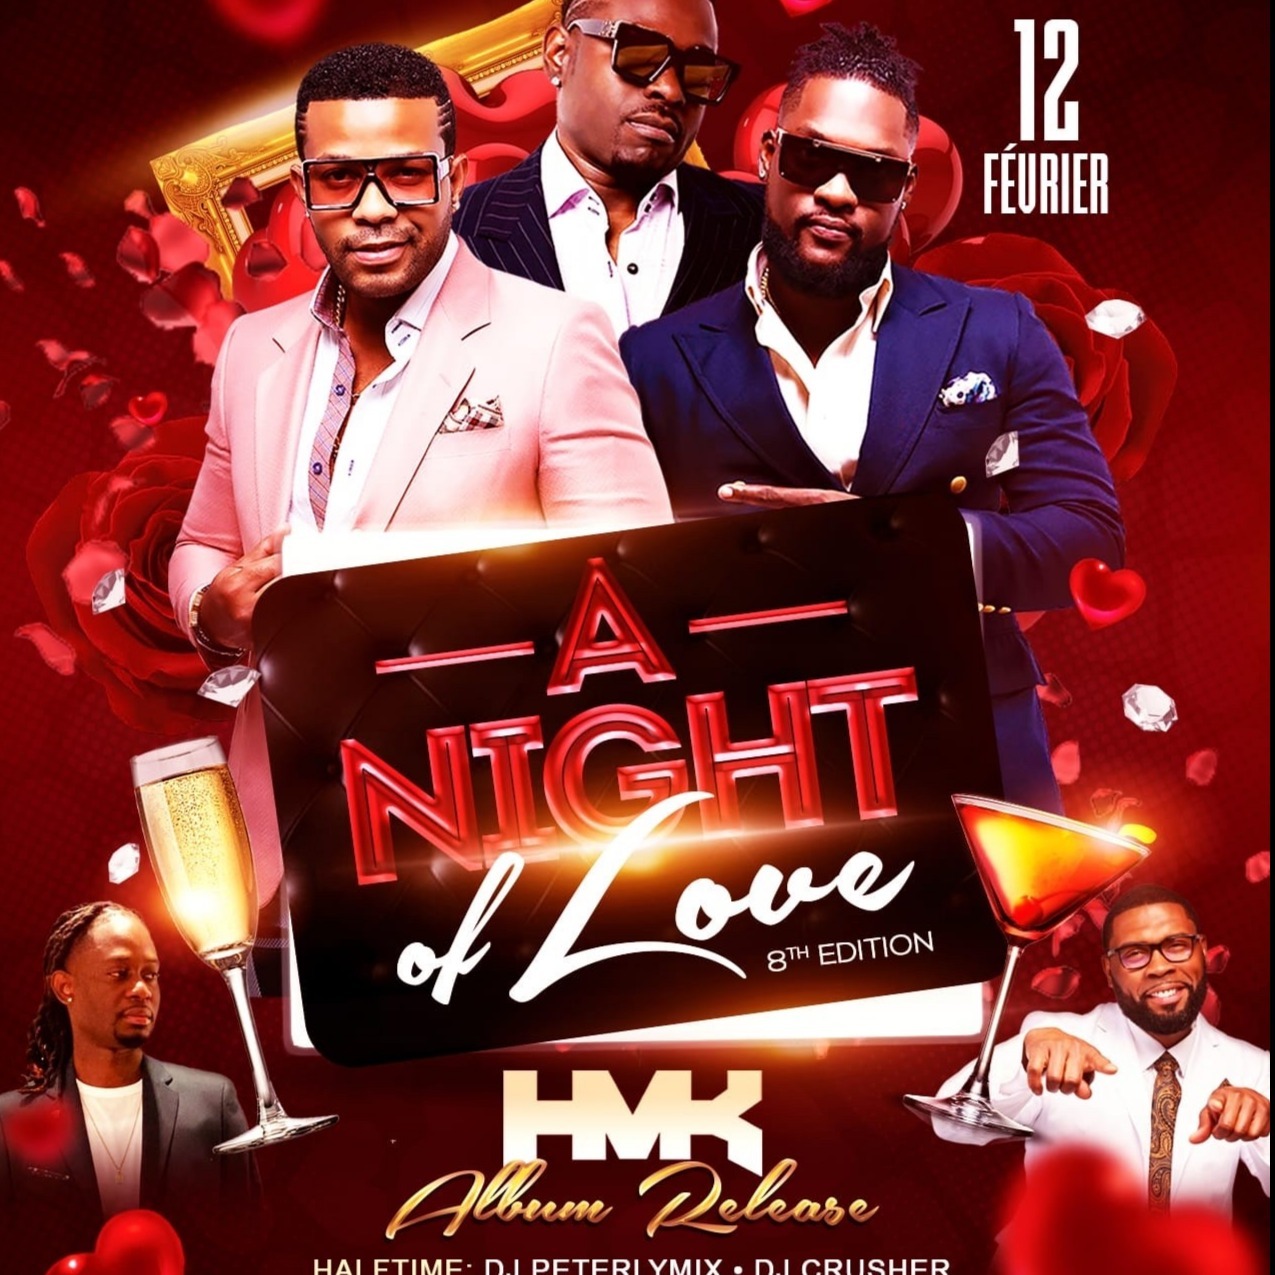 A NIGHT OF LOVE 8TH EDITION